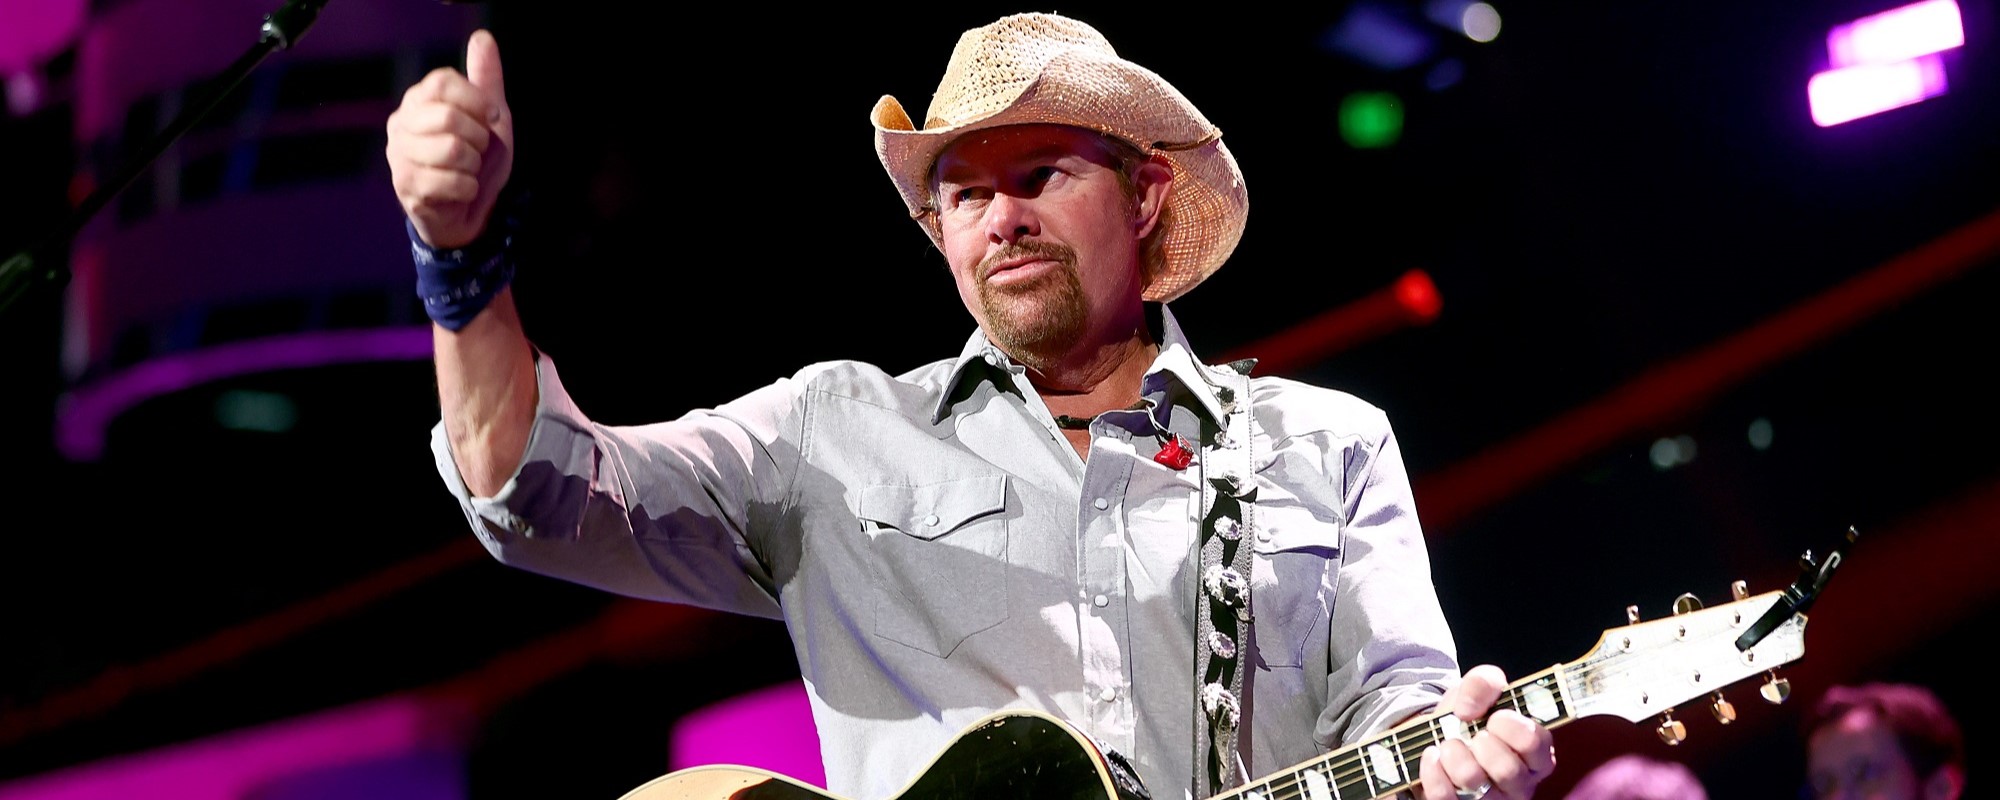 4 “Should’ve Been a Cowboy” Covers That Actually Do Toby Keith Justice